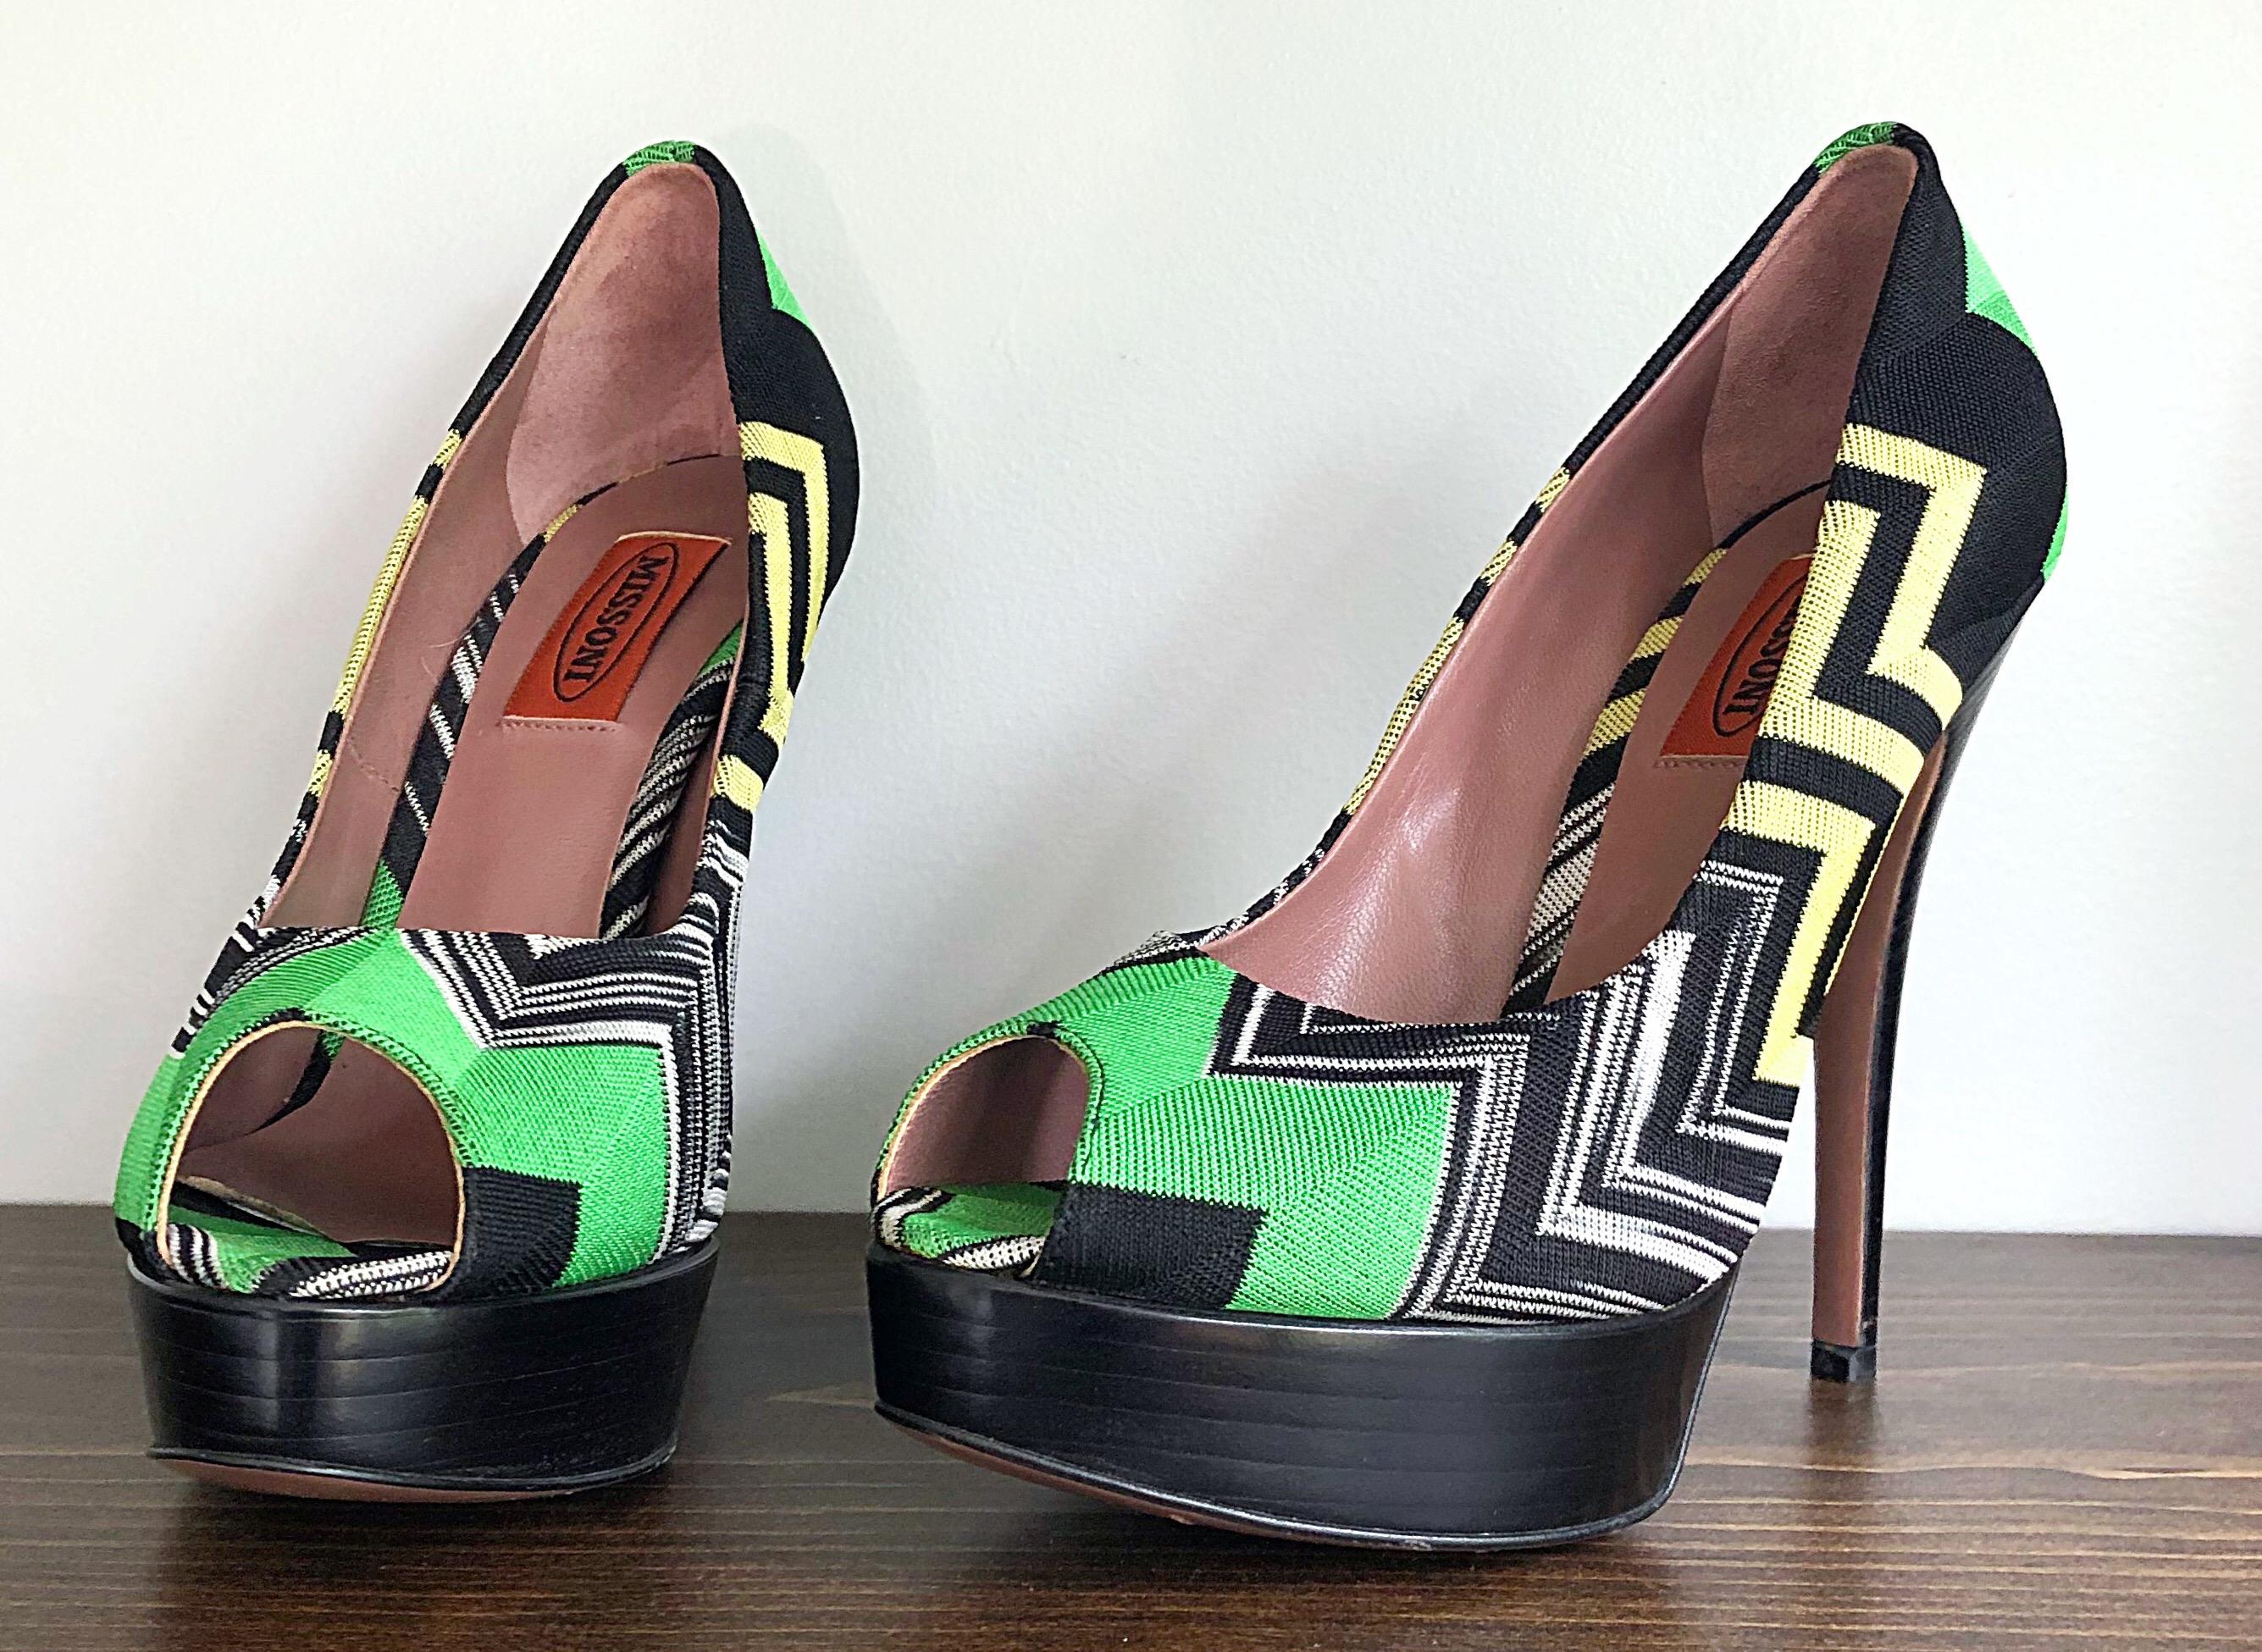 Add a bit of jazz to any outfit in these early 2000s vintage MISSONI peep toe platform high heels ! Features the signature chevron zig zag patterns in kelly green, yellow, white and black. Stacked platform makes these comfortable for all day wear.